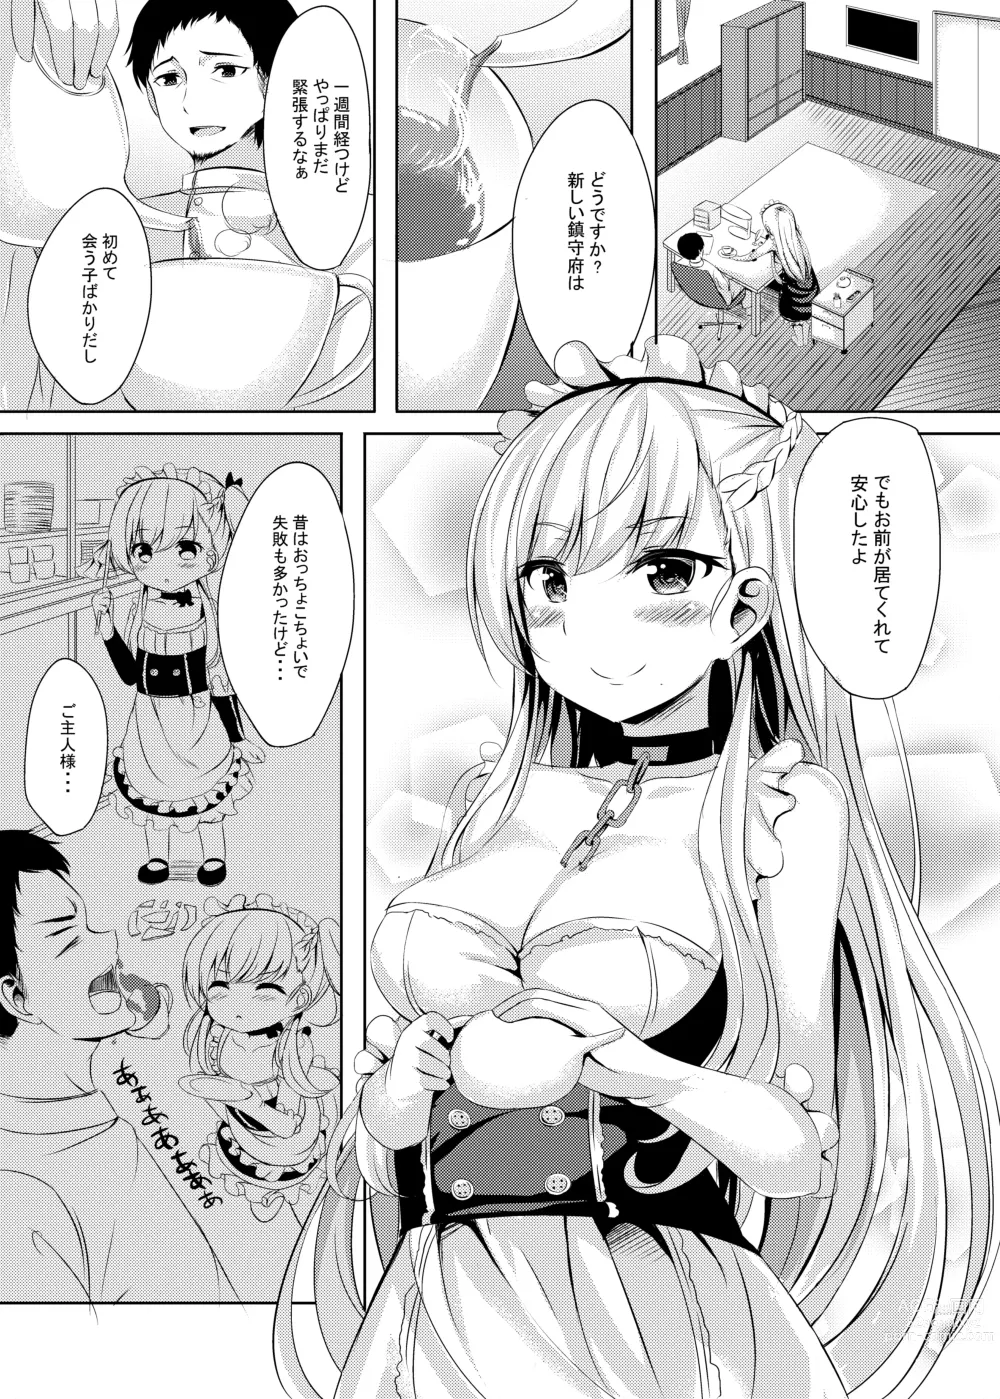 Page 3 of doujinshi ring the bell